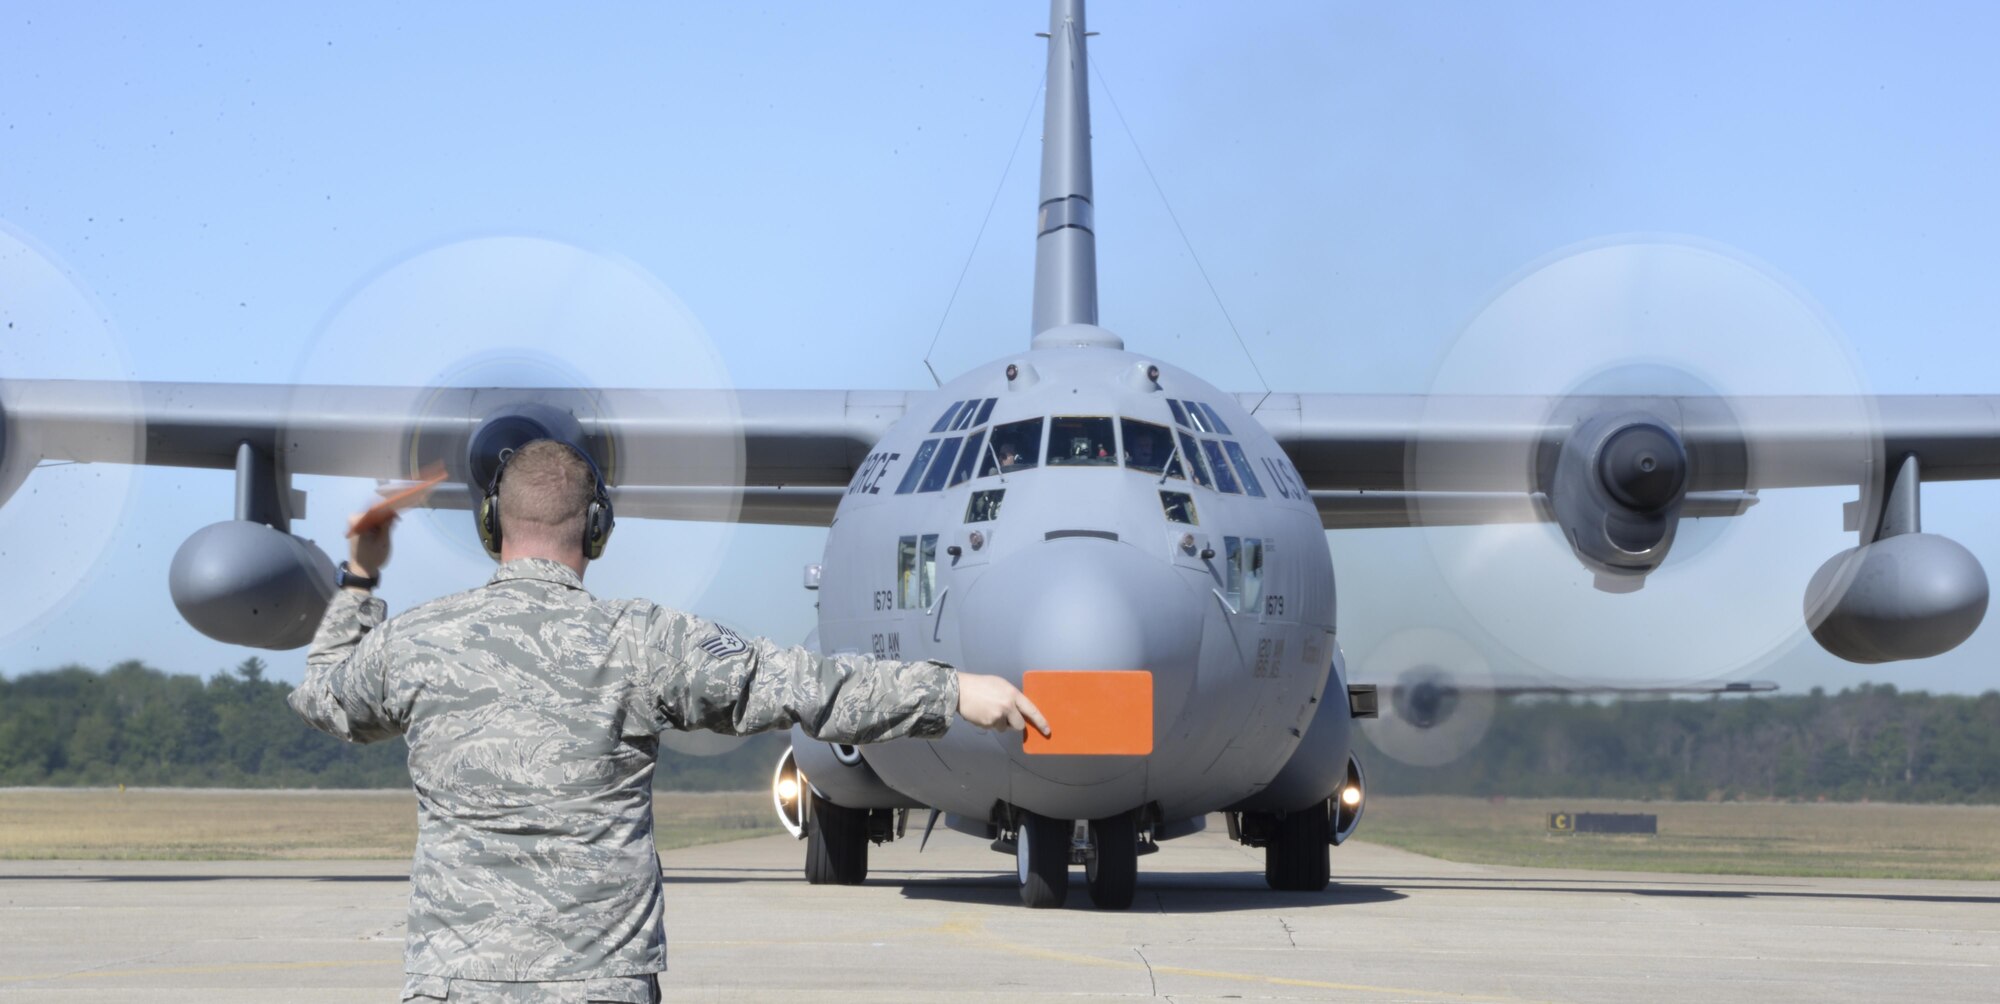 Staff Sgt. Michael Pike, 921st Contingency Response Squadron aero maintenance craftsman, marshals a C-130 Hercules during  Exercise Northern Strike at Grayling Army Airfield, Michigan, Aug. 8, 2016. Exercise Northern Strike is a large-scale exercise coordinated by the Michigan Army National Guard and features Army, Marines and Air Force working together for total force integration. (U.S. Air Force photo by Senior Airman Amber Carter)